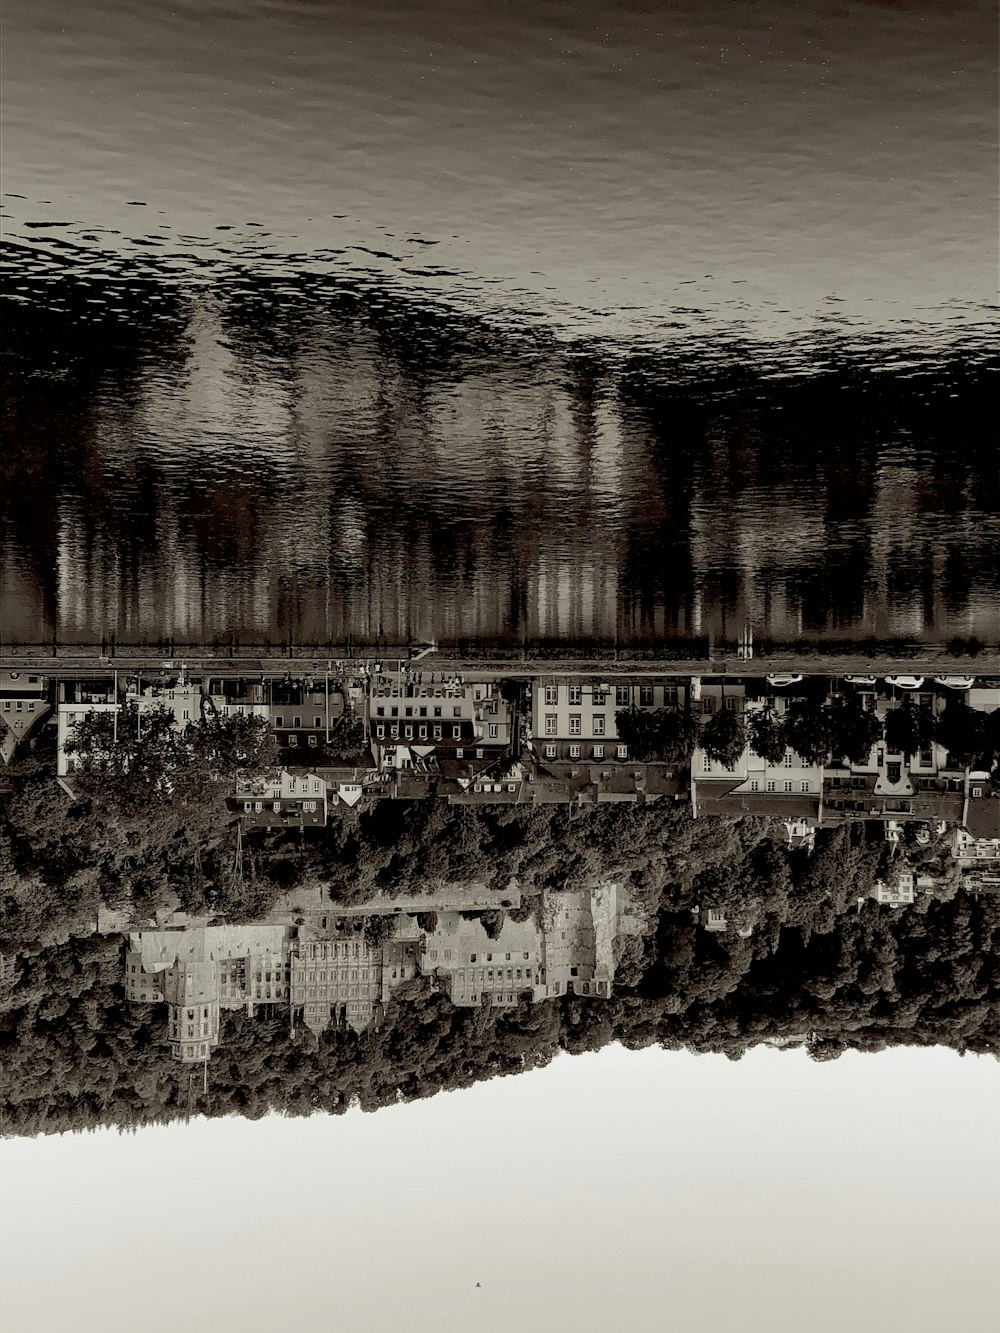 a black and white photo of a city under water